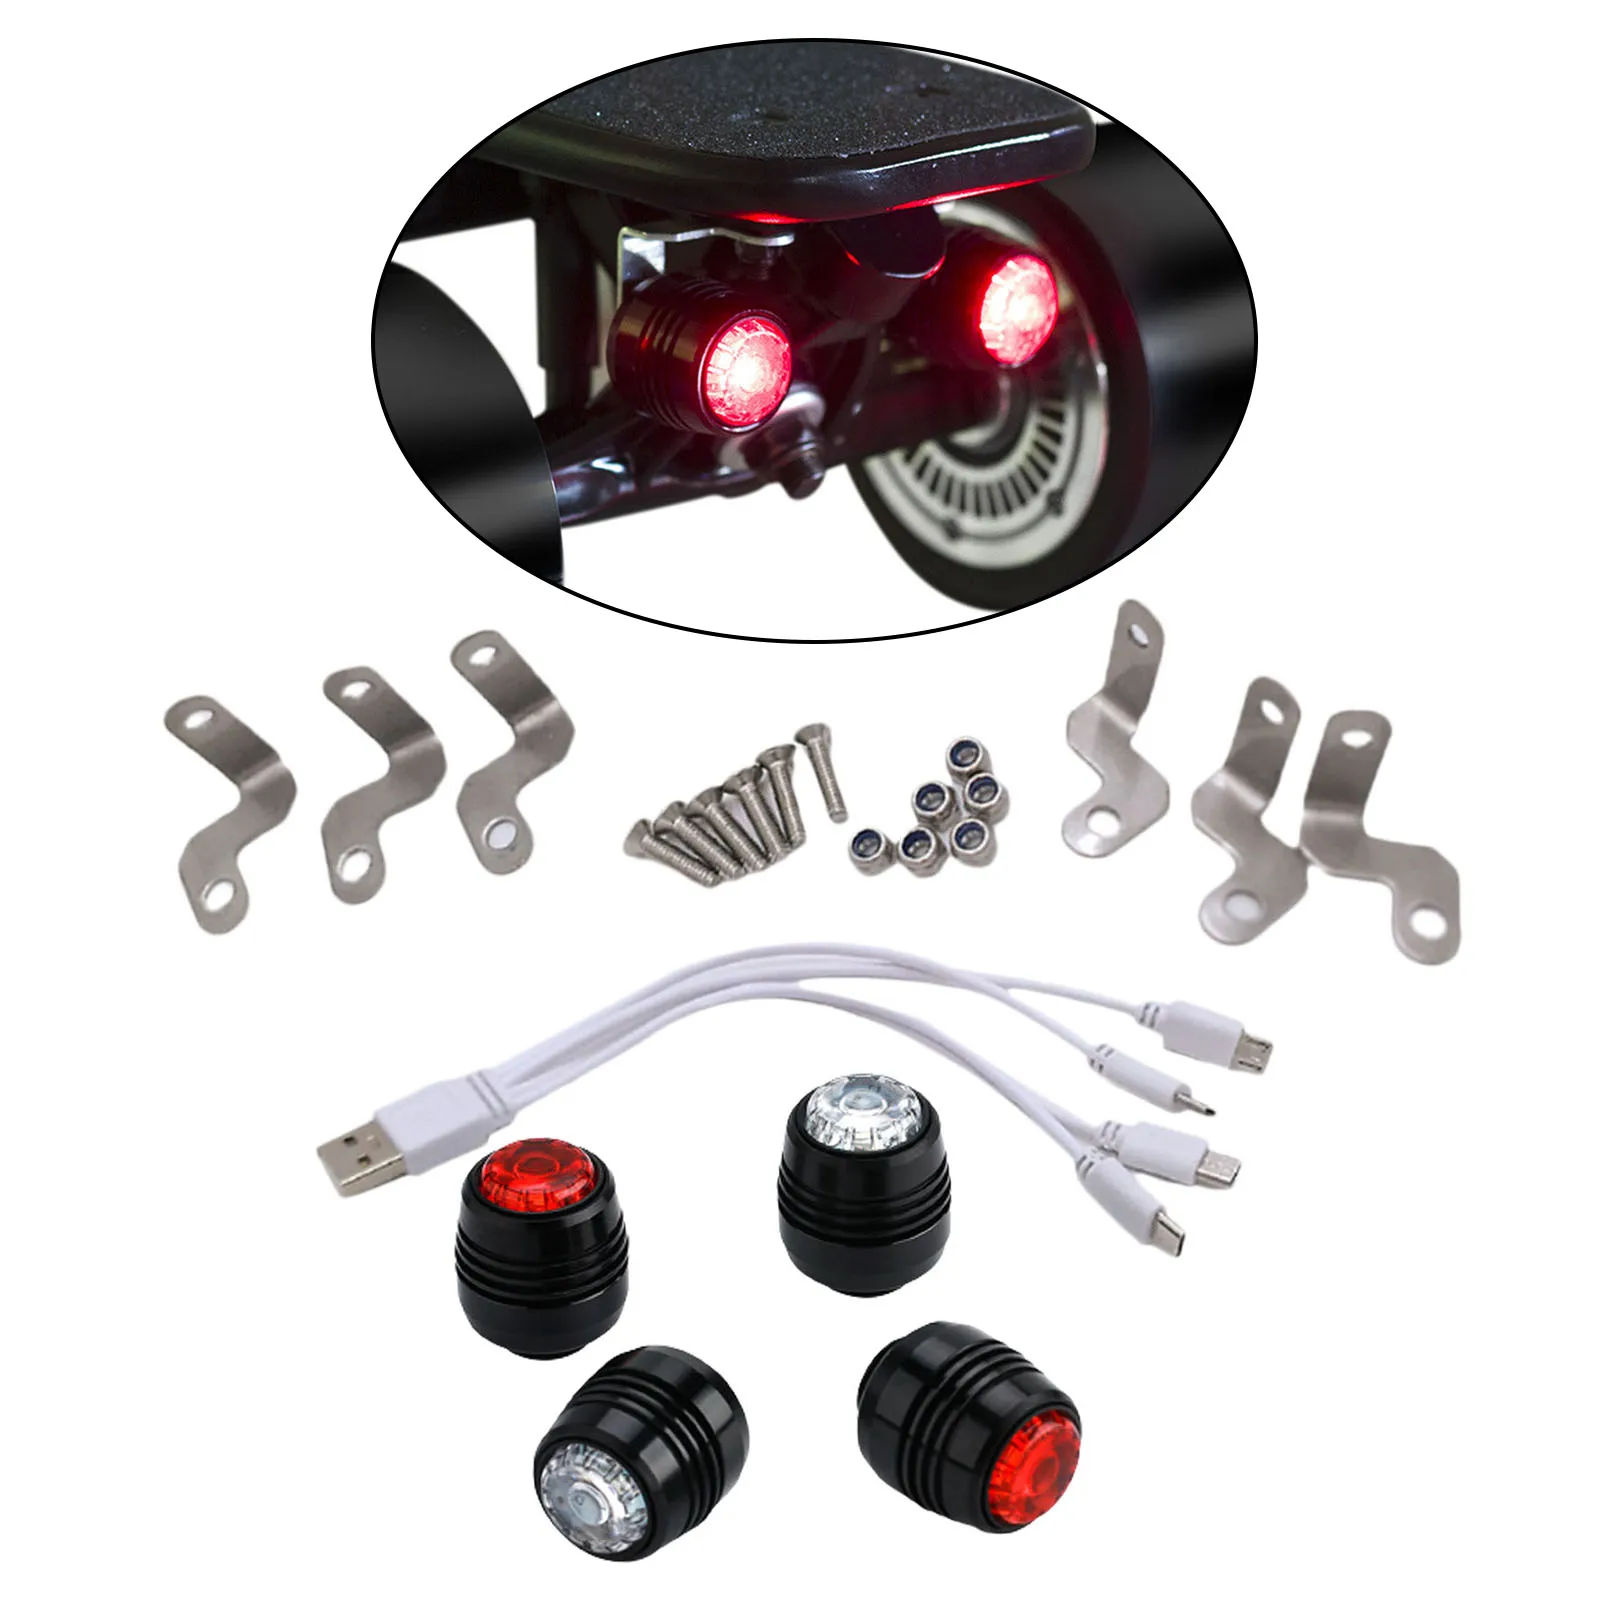 4Pcs Skateboard LED Lights Night Warning Lamp for Longboard Scooters Accessories Safety Lighting Parts